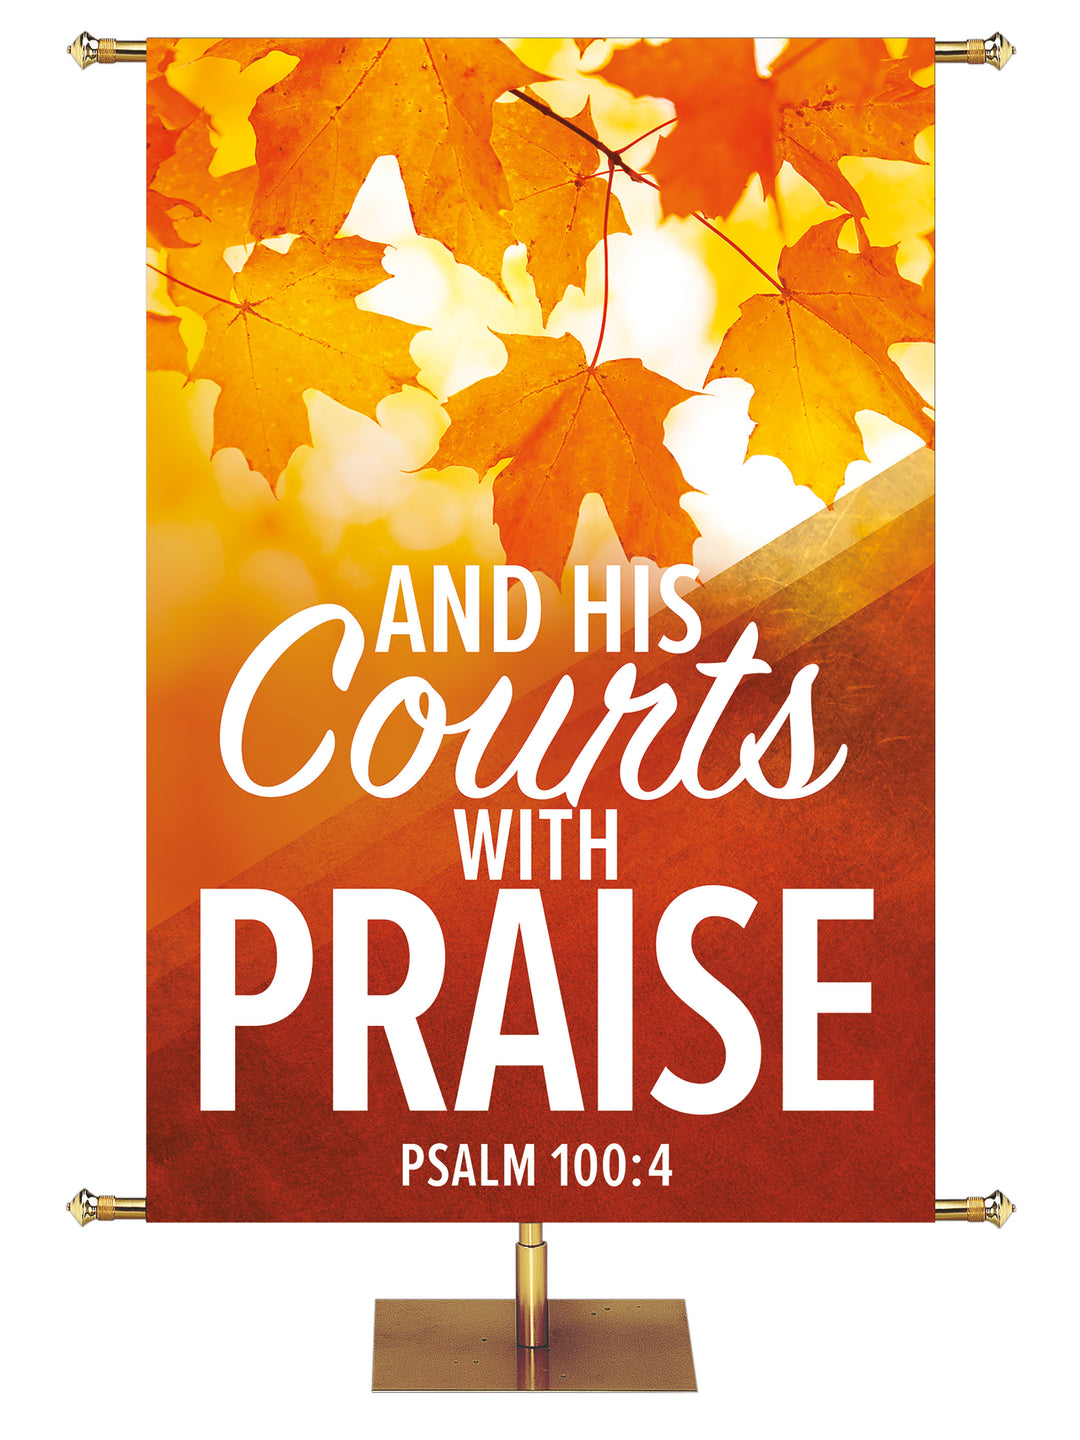 Golden Harvest Courts With Praise - Fall Banners - PraiseBanners